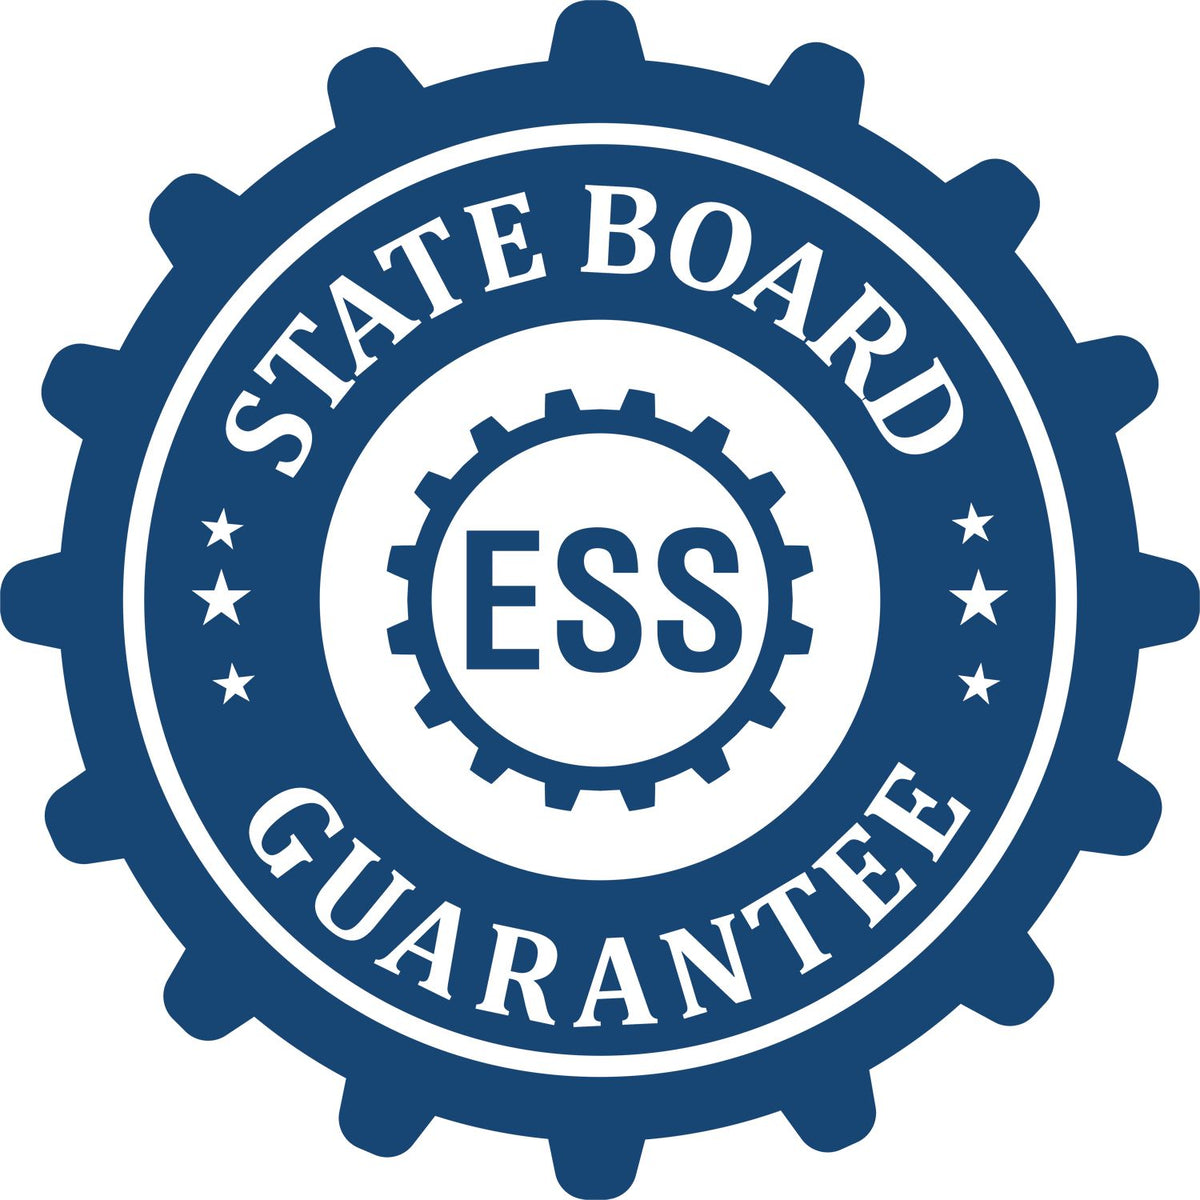 An emblem in a gear shape illustrating a state board guarantee for the Wooden Handle West Virginia State Seal Notary Public Stamp product.